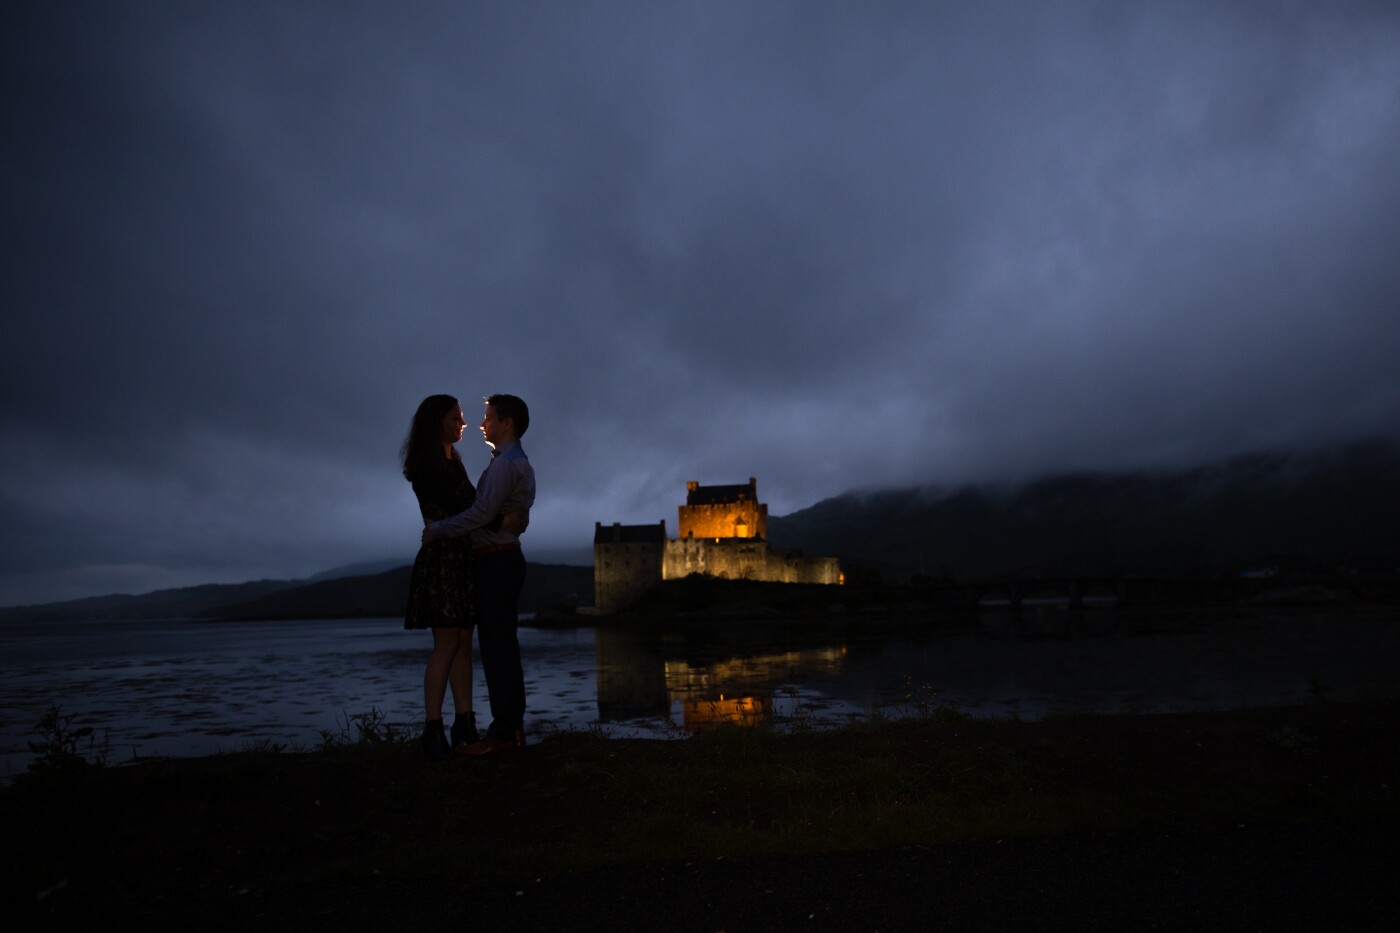 This couple shared my dream to do an incredible Loveshoot at the Eilean Donan Castle in Scotland near Dornie. As specialized Wedding Photographer, we only shoot weddings at old castles and mansions so we totally love this 13th-century castle. This photos was made nearly at midnight in June in the twilight. We parked the car near this great spot, and after some testing in the rain with the couple waiting in the car it went dry and we had about 5 minutes before the rain went back. Back in the car we discovered we forgot the close it, so we had a whole mosquito family the rest of the trip with us. But it was worth every mosquito bite ;).